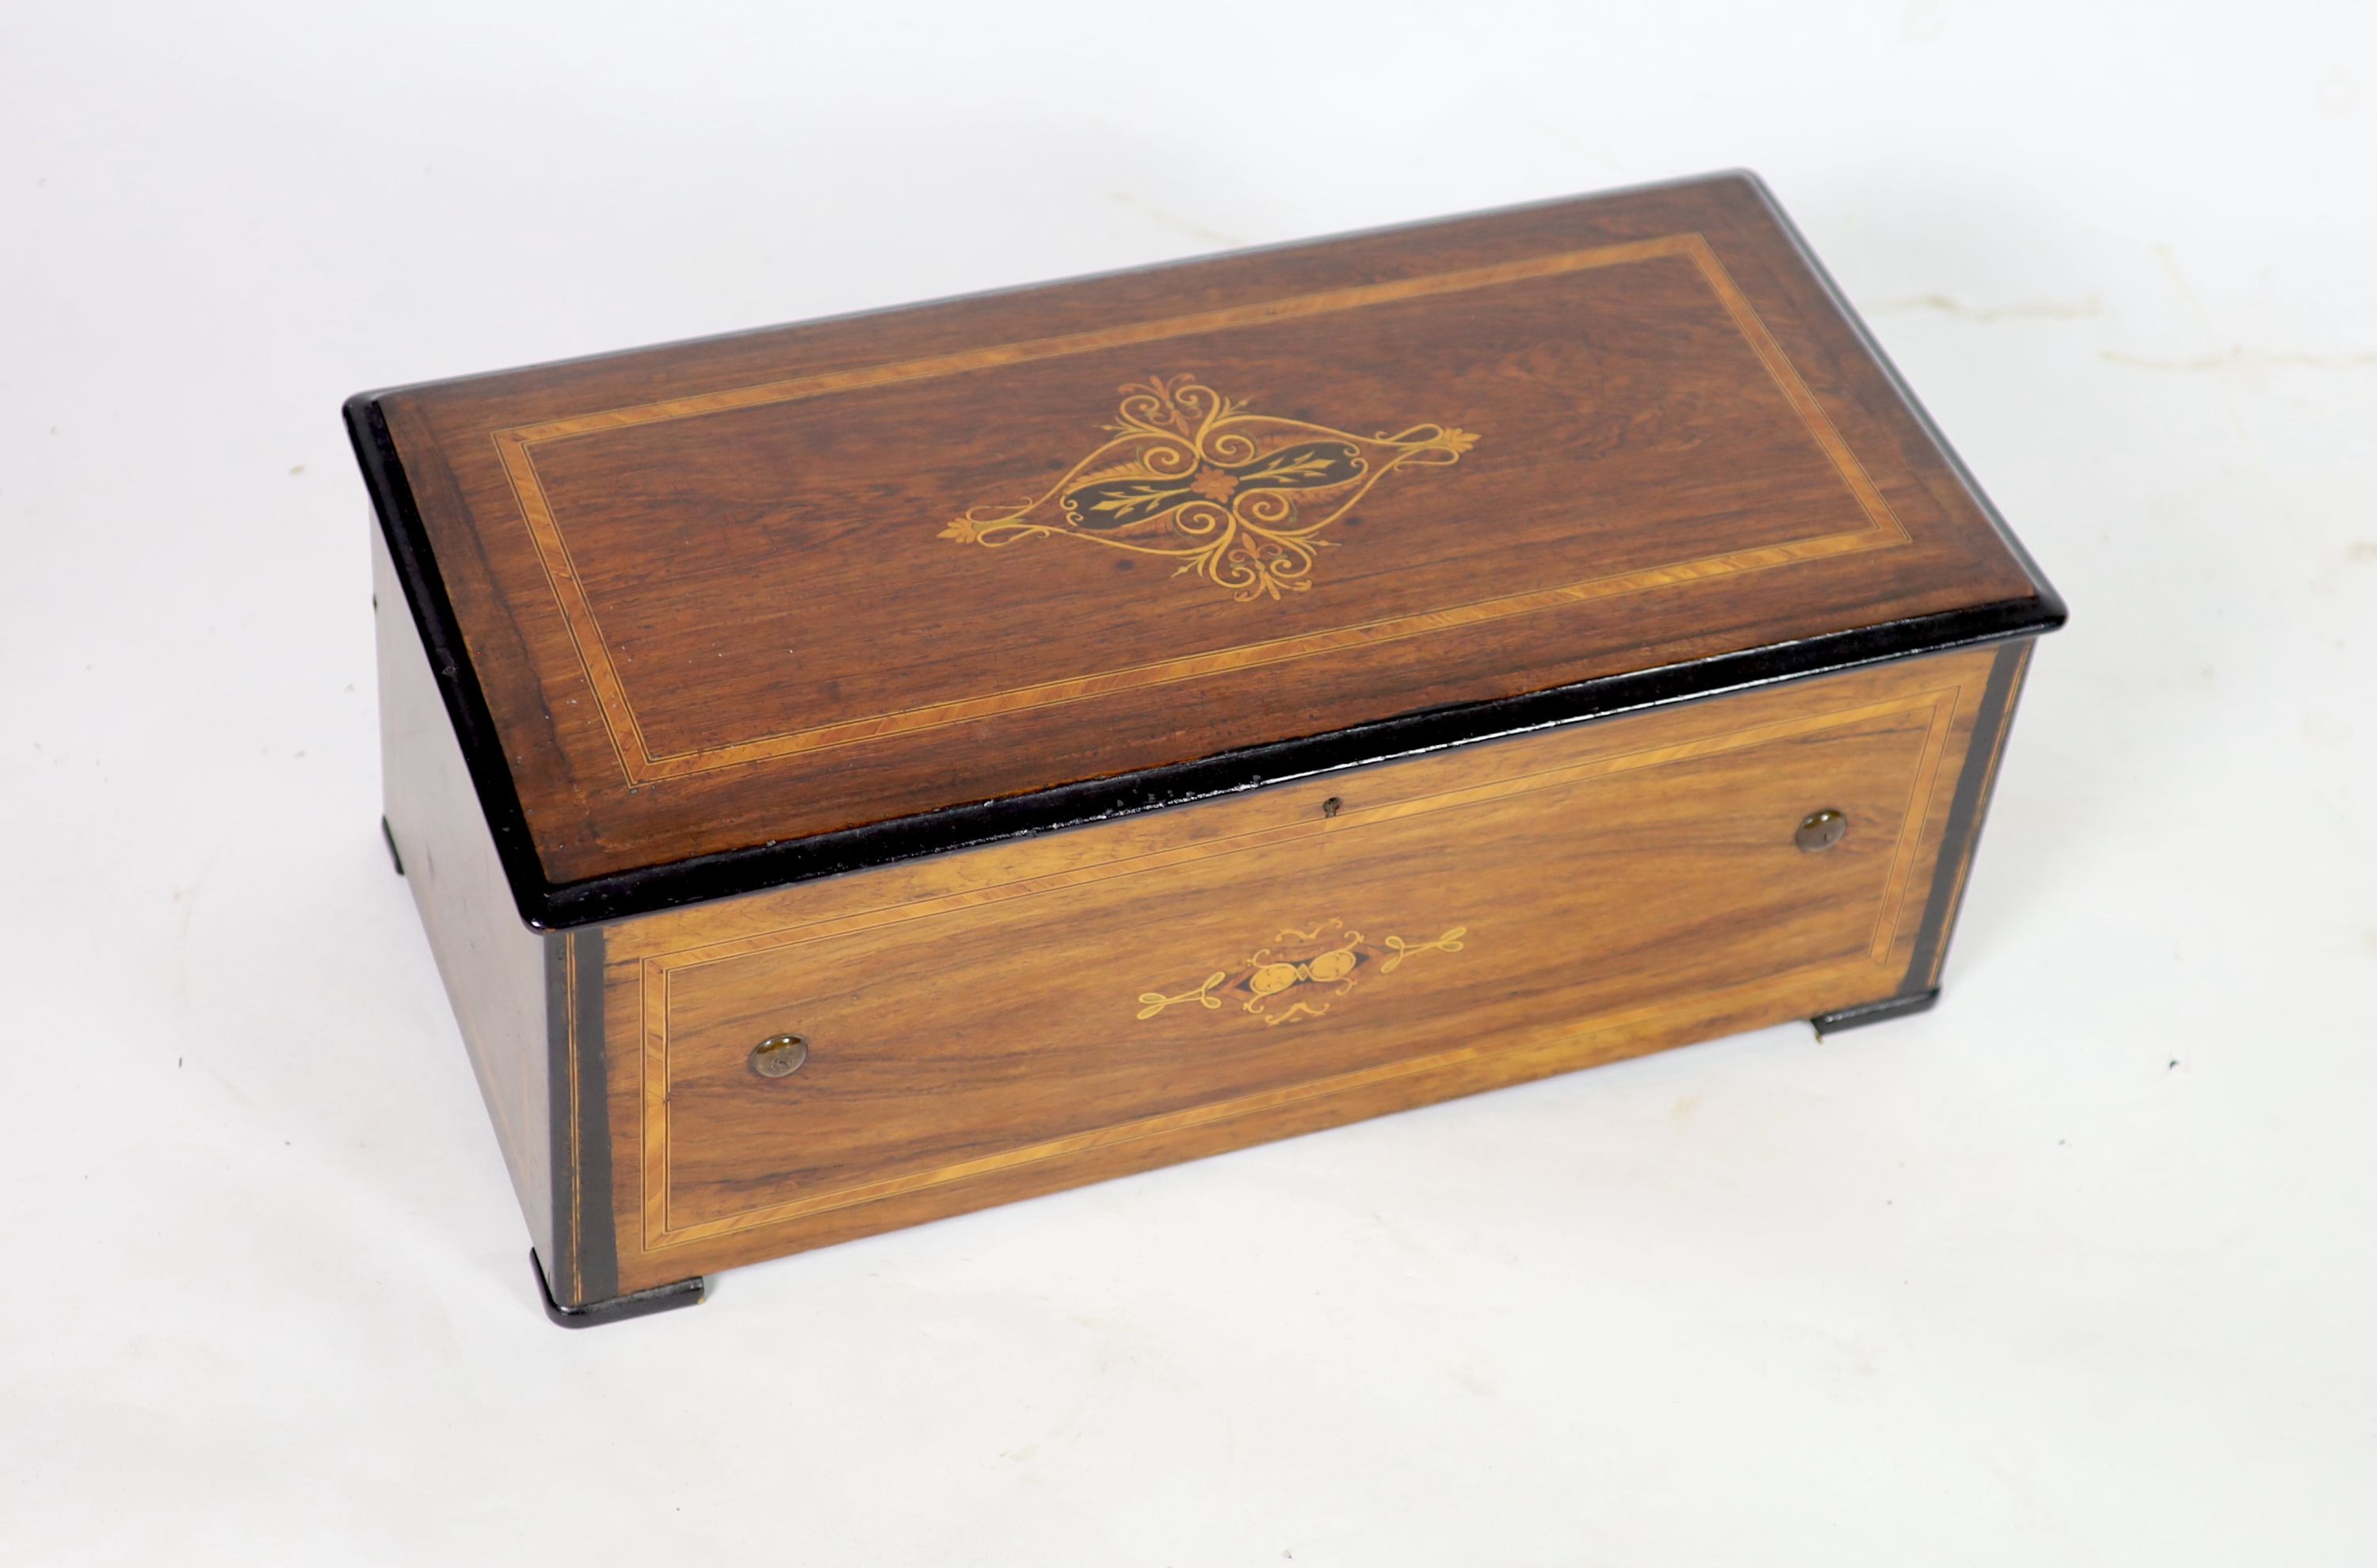 A late 19th century Swiss marquetry inlaid rosewood ten air musical box, width 67cm depth 32cm height 26cm